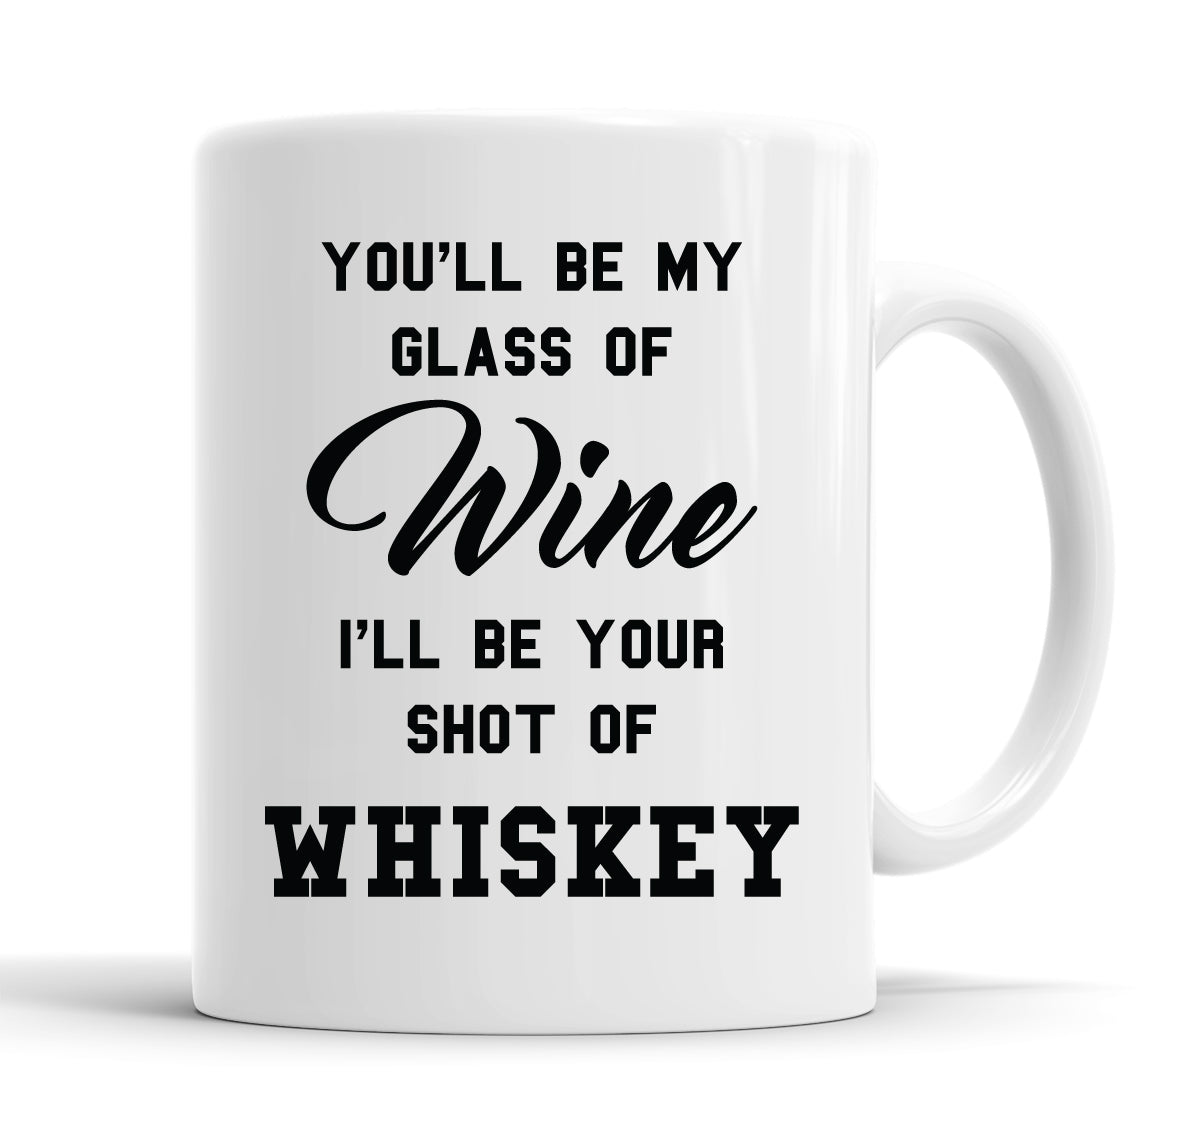 You'll Be My Glass Of Wine, I'll Be Your Shot Of Whiskey Funny Slogan Mug Tea Cup Coffee